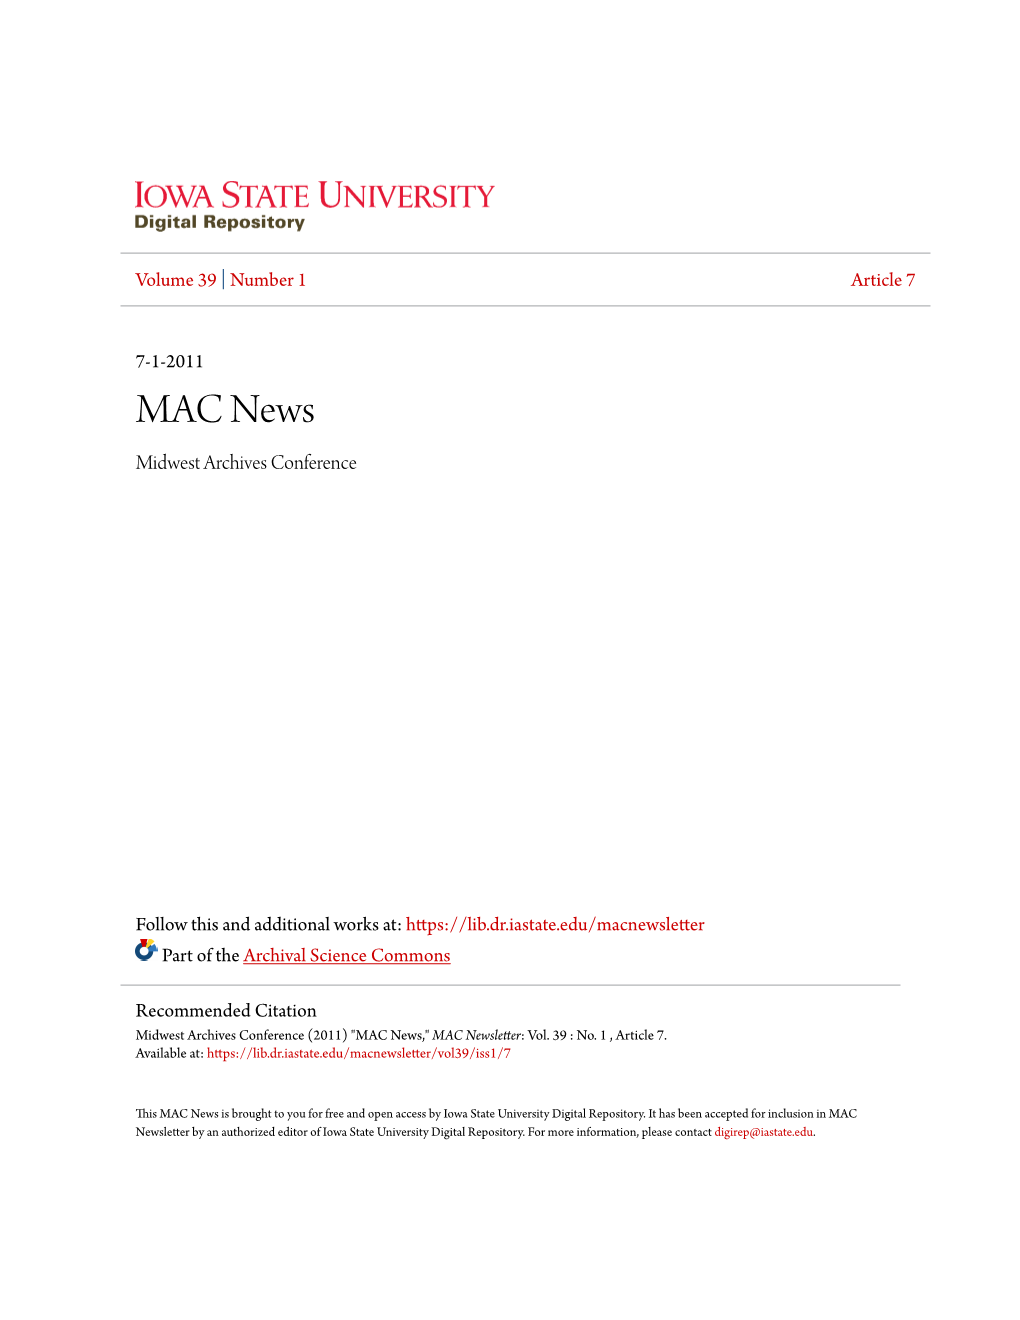 MAC News Midwest Archives Conference